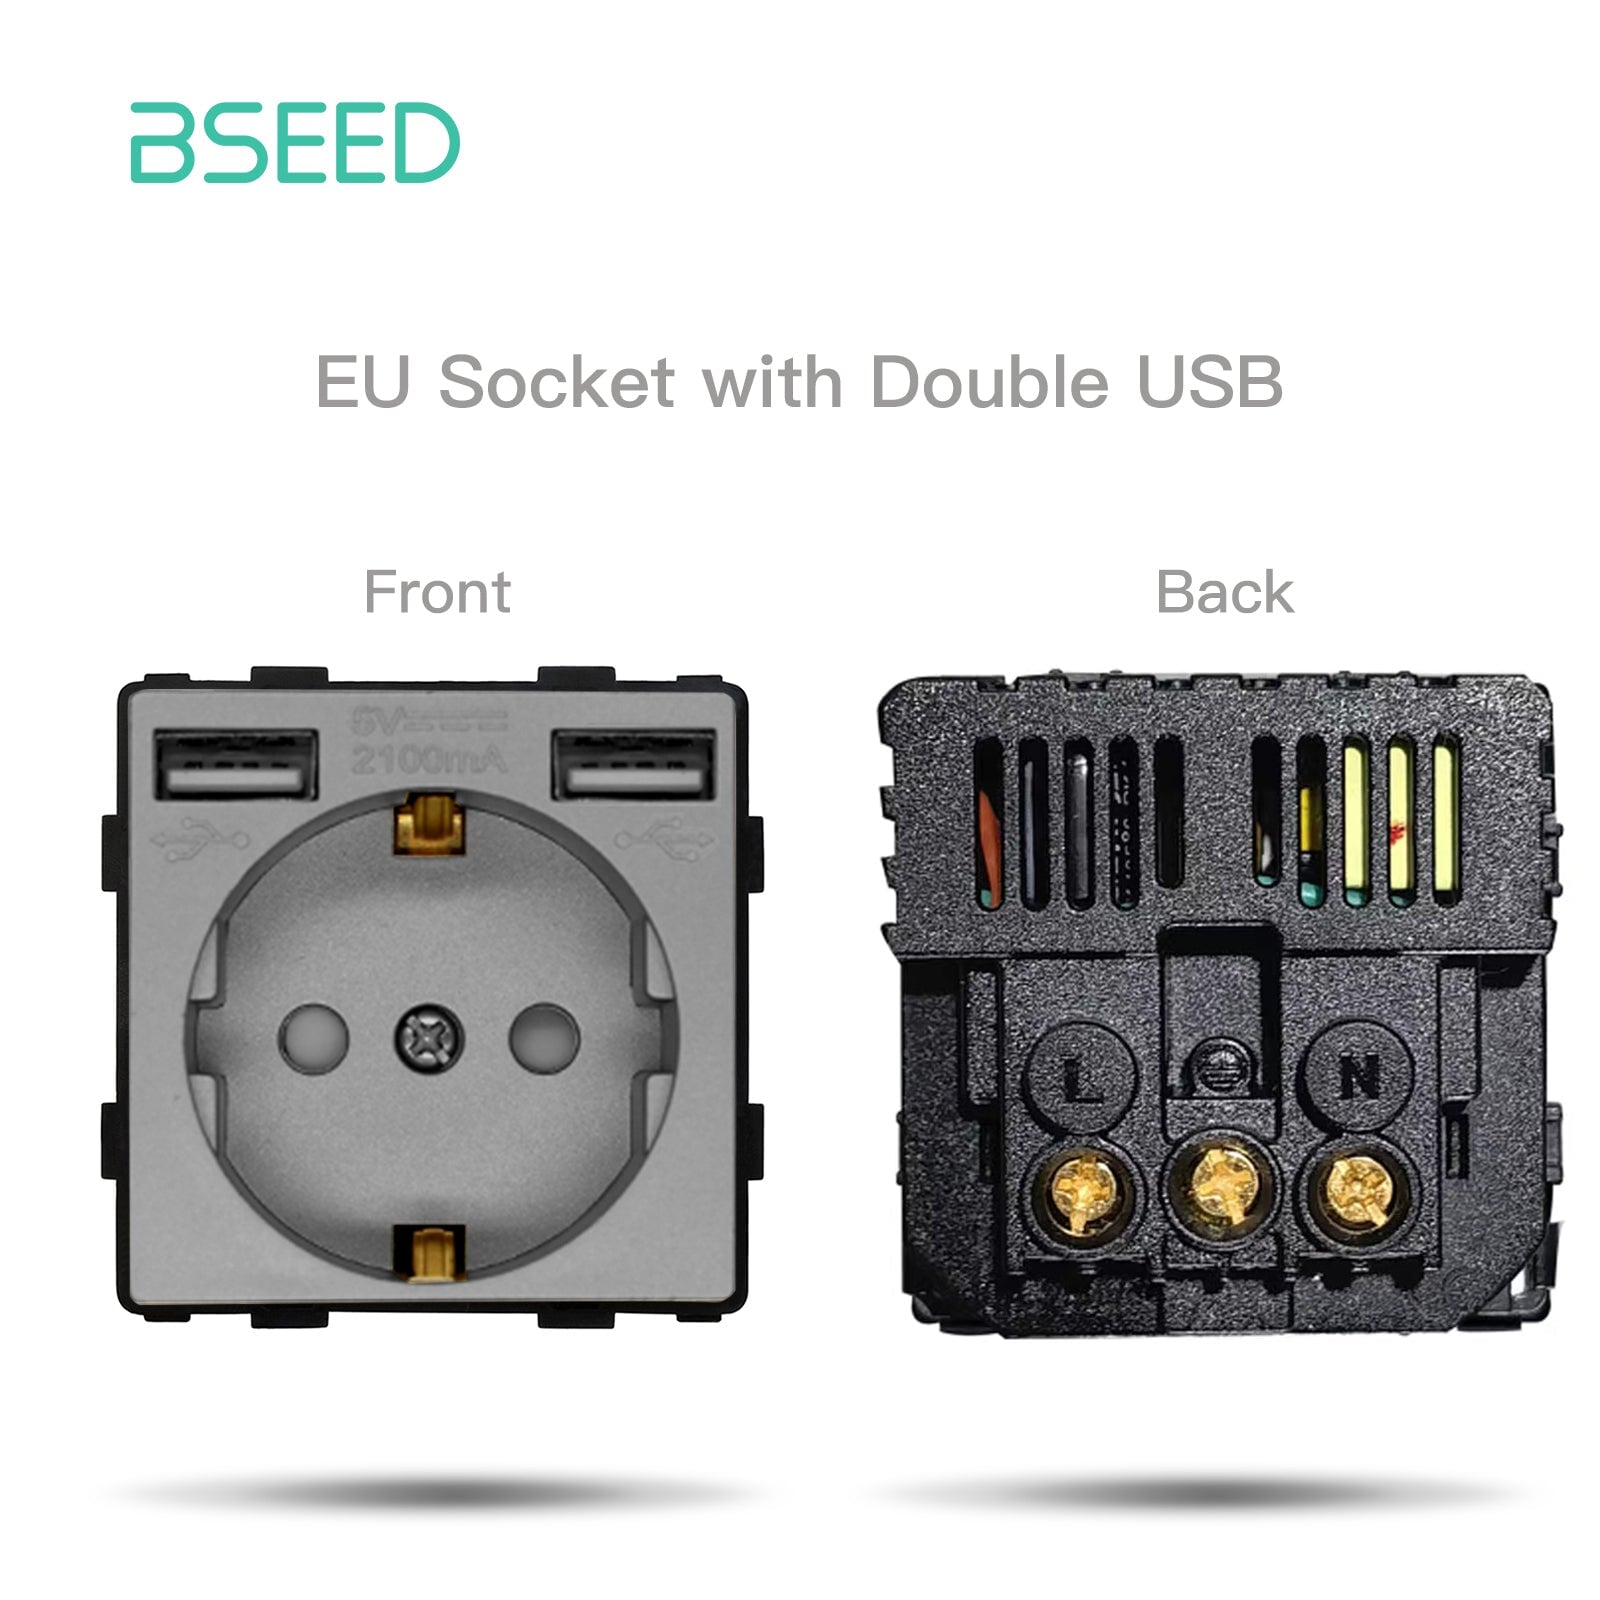 BSEED EU standard Function Key Cover Socket With Double USB socket DIY Parts Power Outlets & Sockets Bseedswitch GREY 